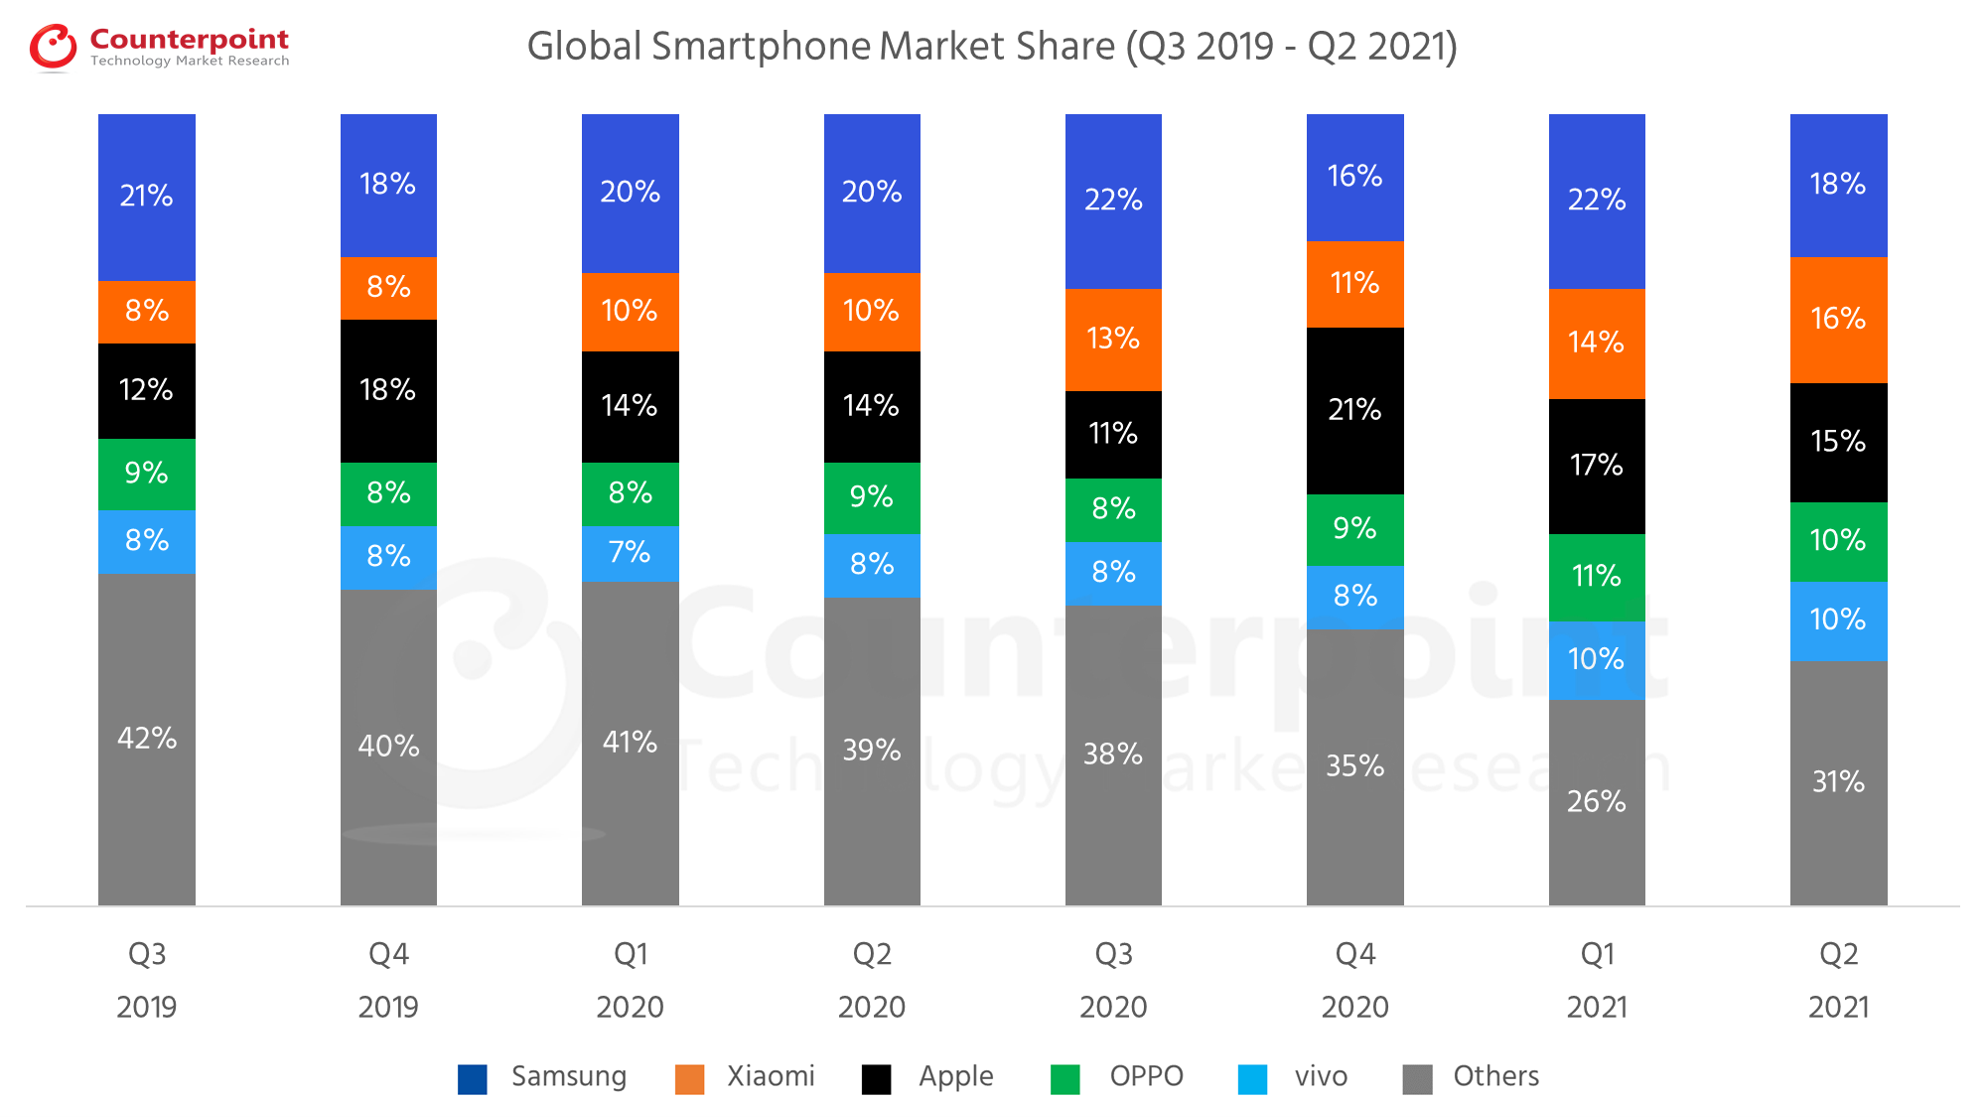 Counterpoint Research - Q2 2021 - Global Smartphone Market